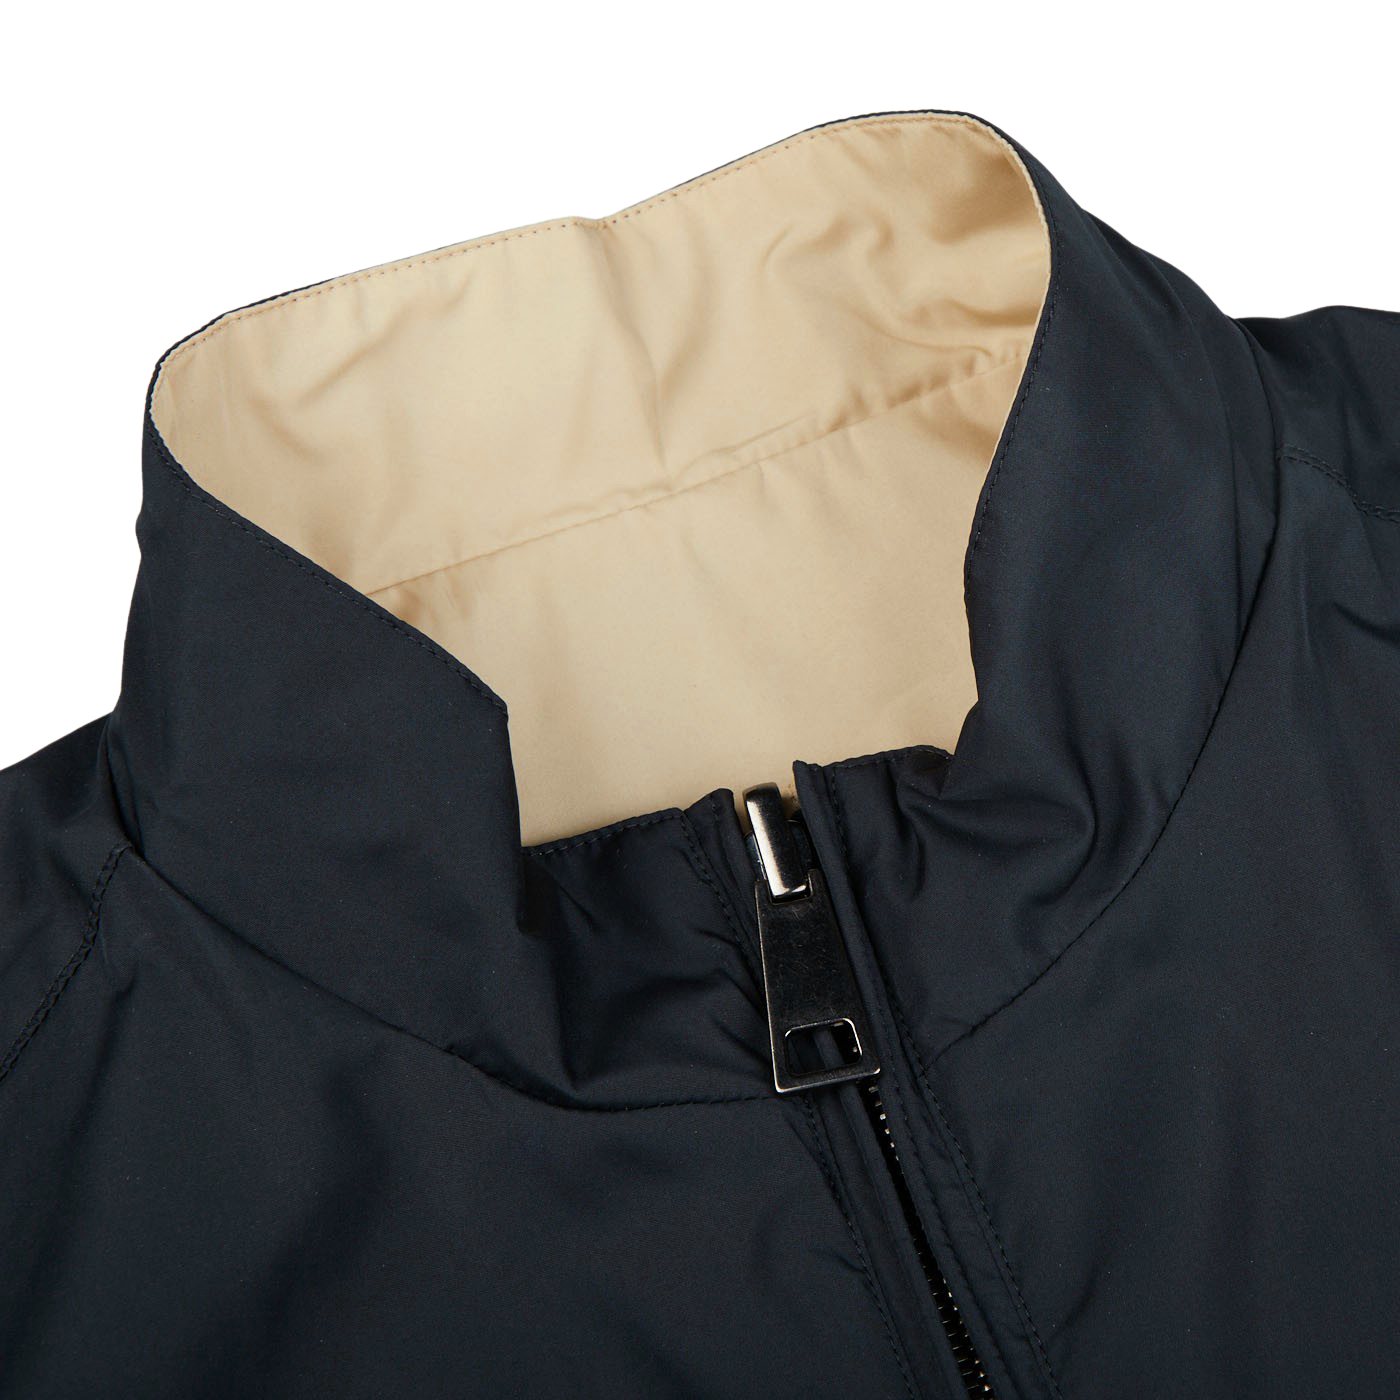 A Canali Navy Blue Beige Reversible Technical Gilet with a zipper.